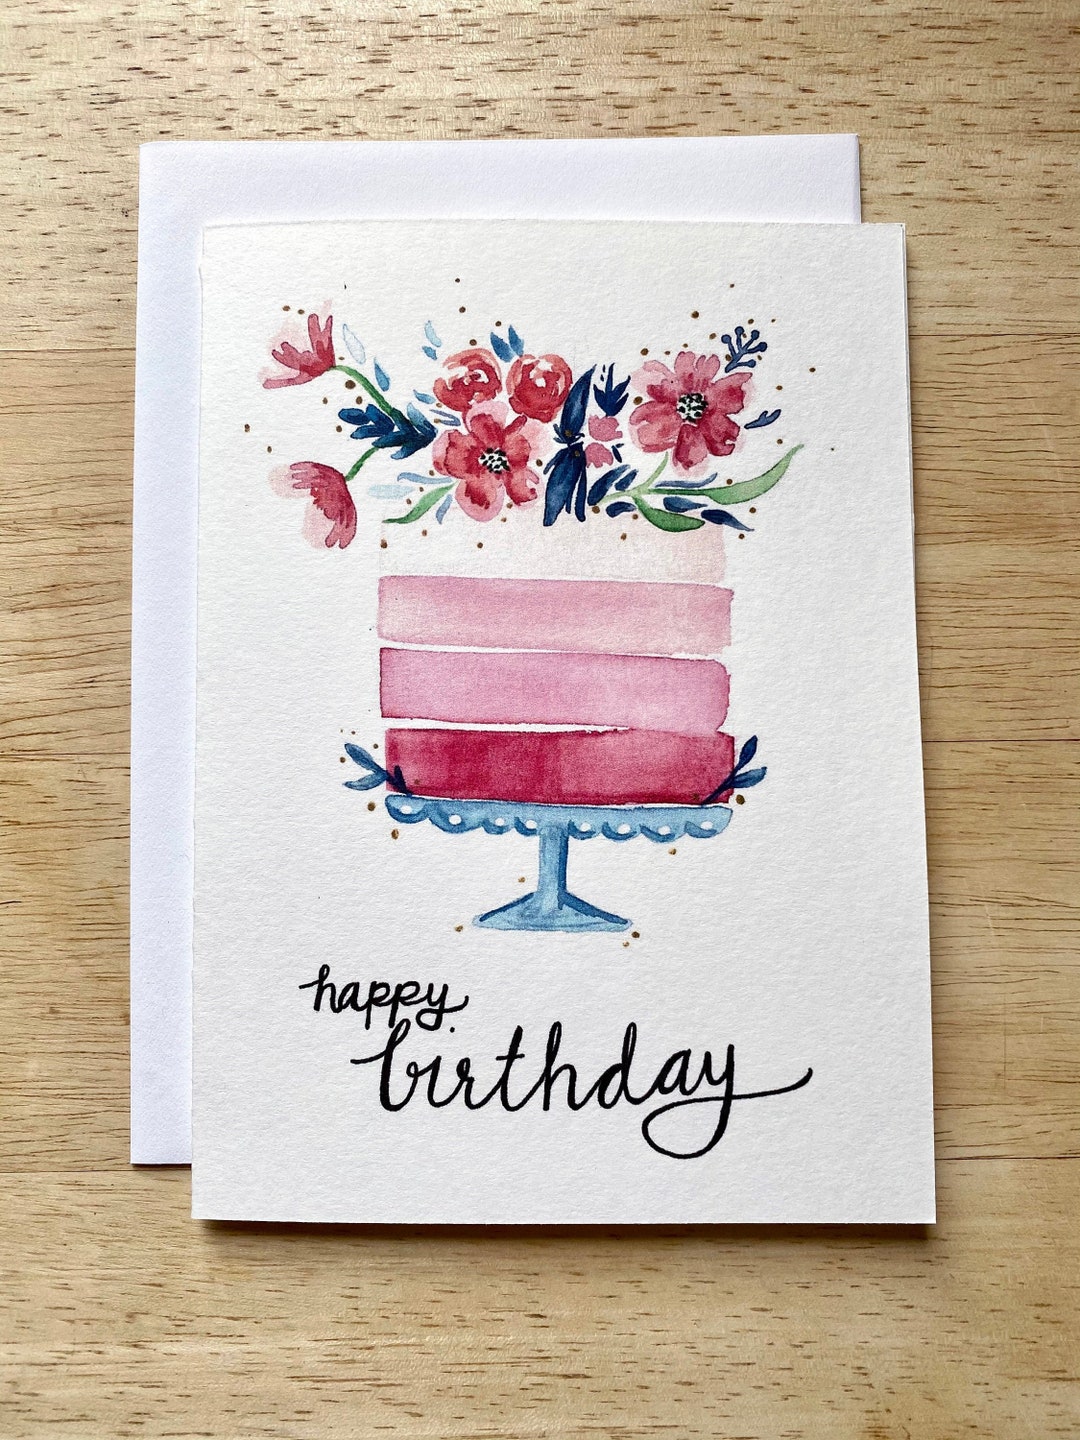 Happy Birthday Cake & Flowers Watercolor Card Single or Sets - Etsy